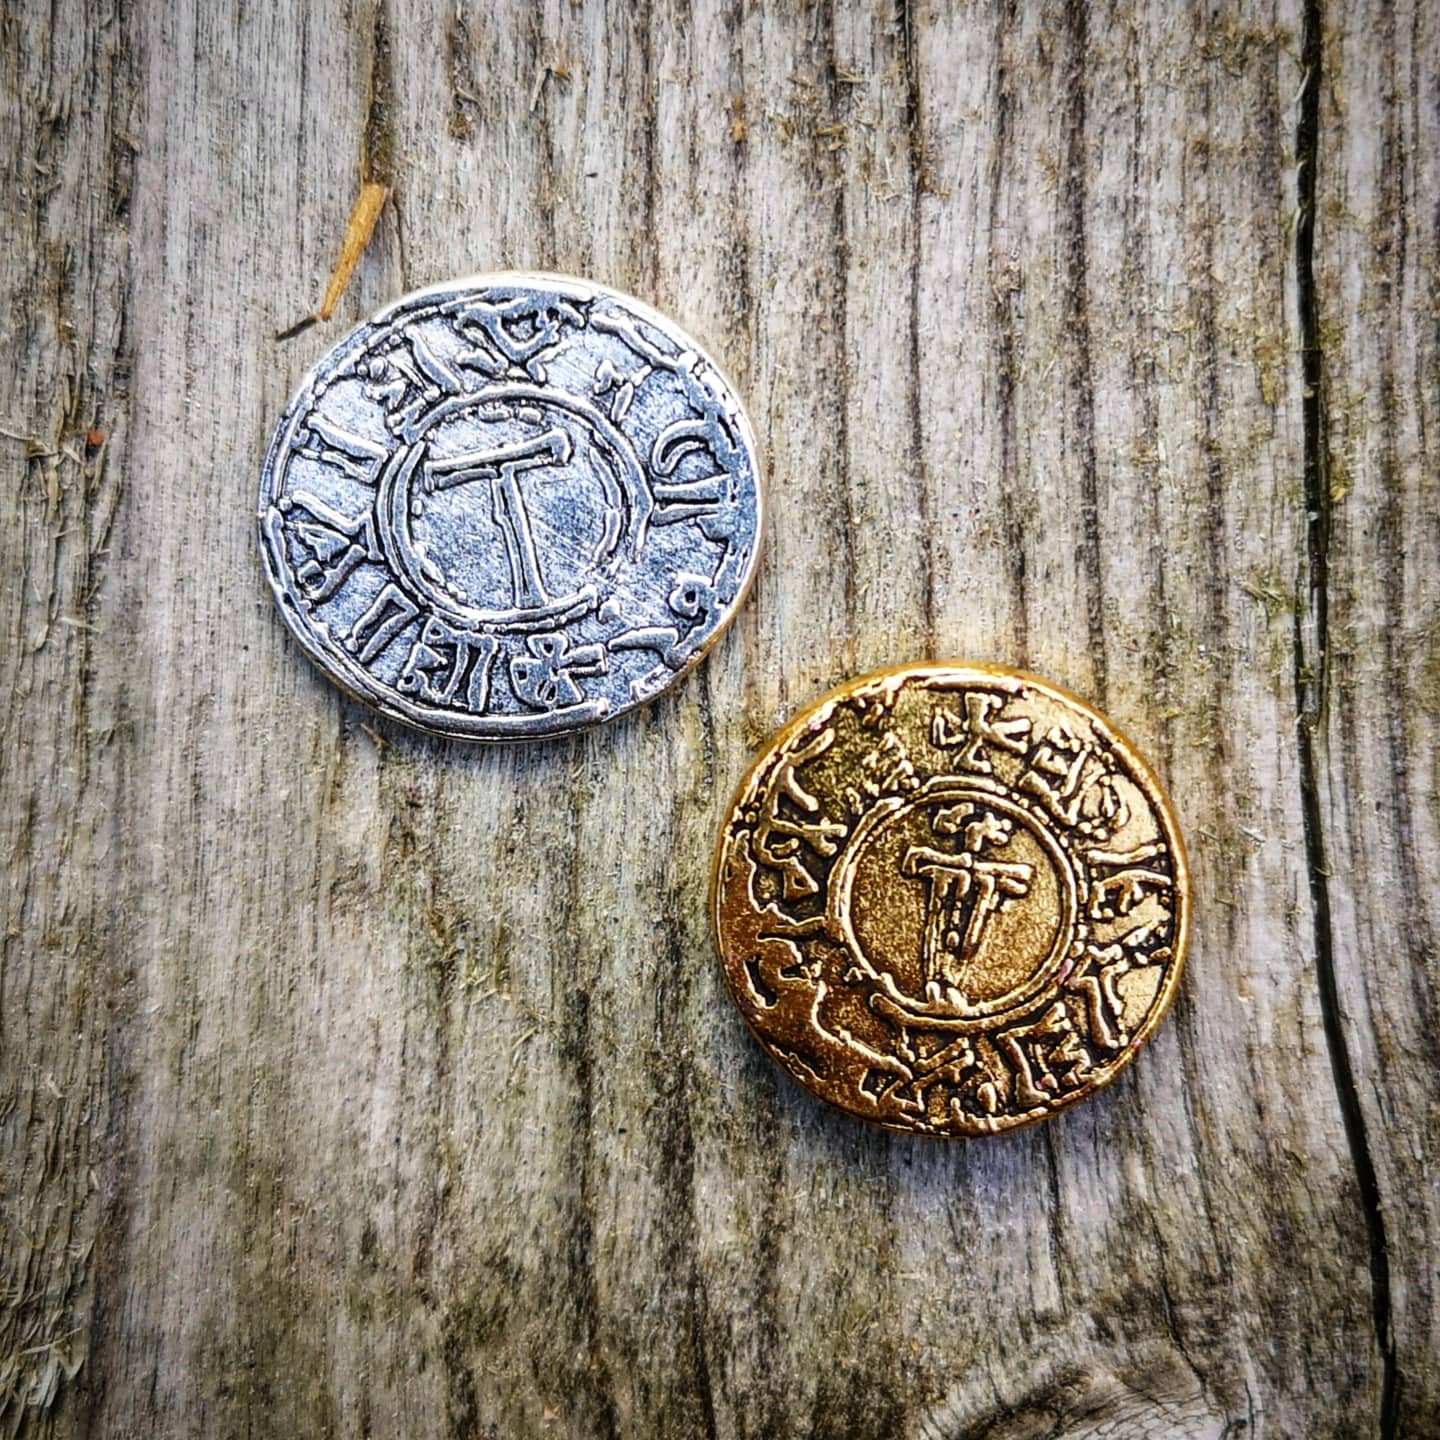 PAX Viking Metal Game Coins - Expanded view of one Silfr and one Gull coin to be used with the PAX Viking board game